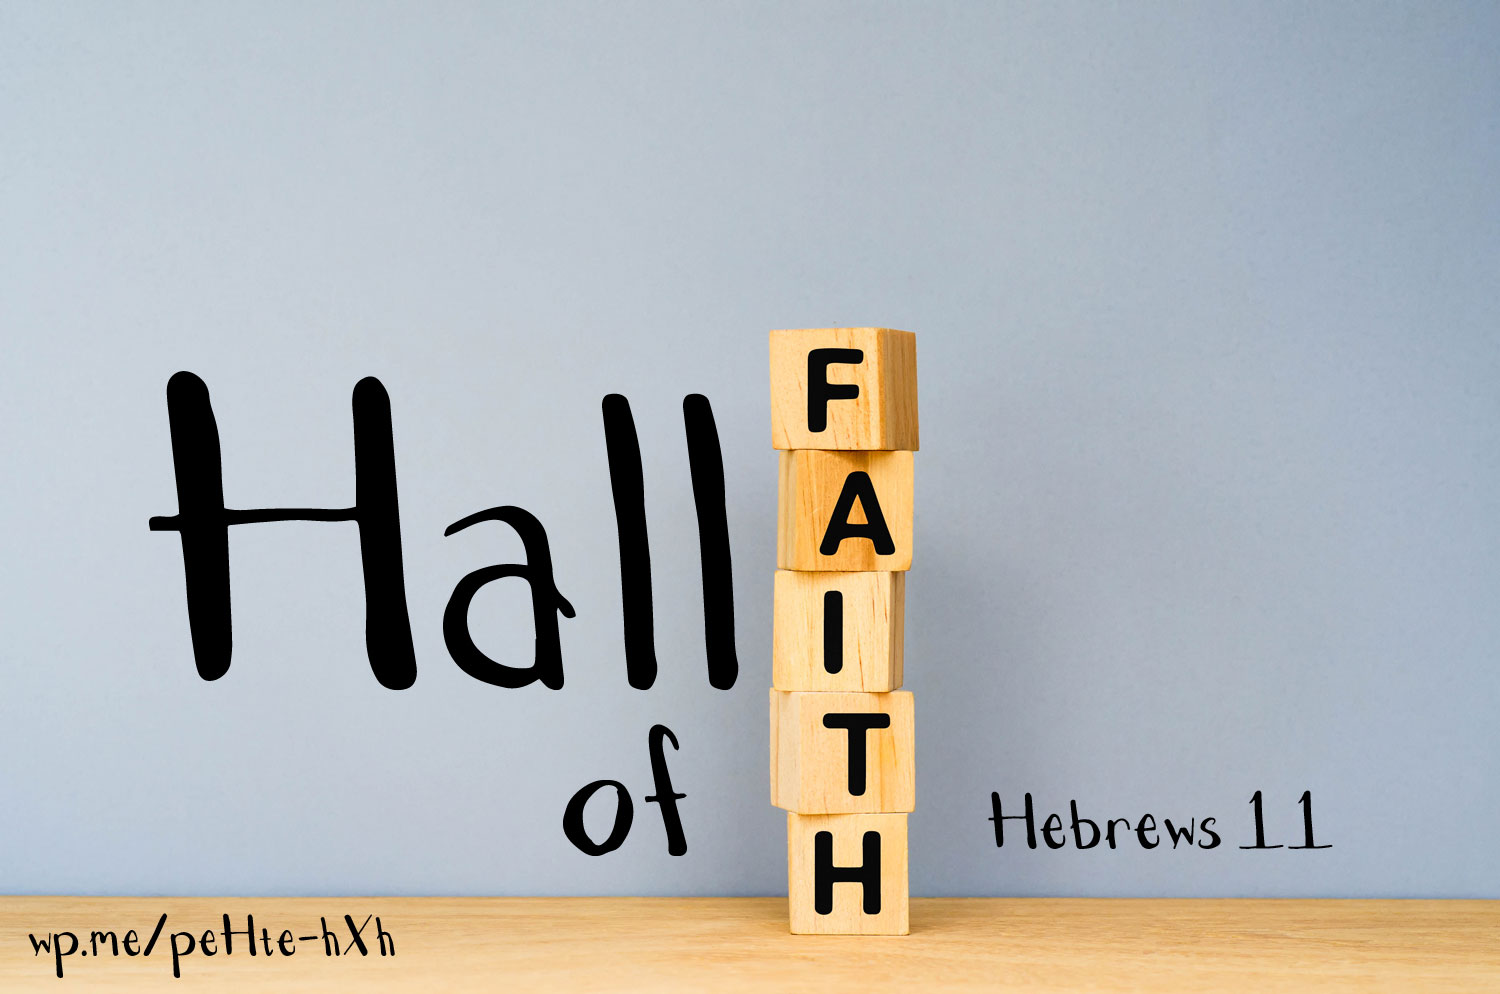 Faith Hall of Fame based on Hebrews 11. The Hall of Fame is similar to that of what you would see at a Basketball Hall of Fame or a Baseball Hall of Fame.